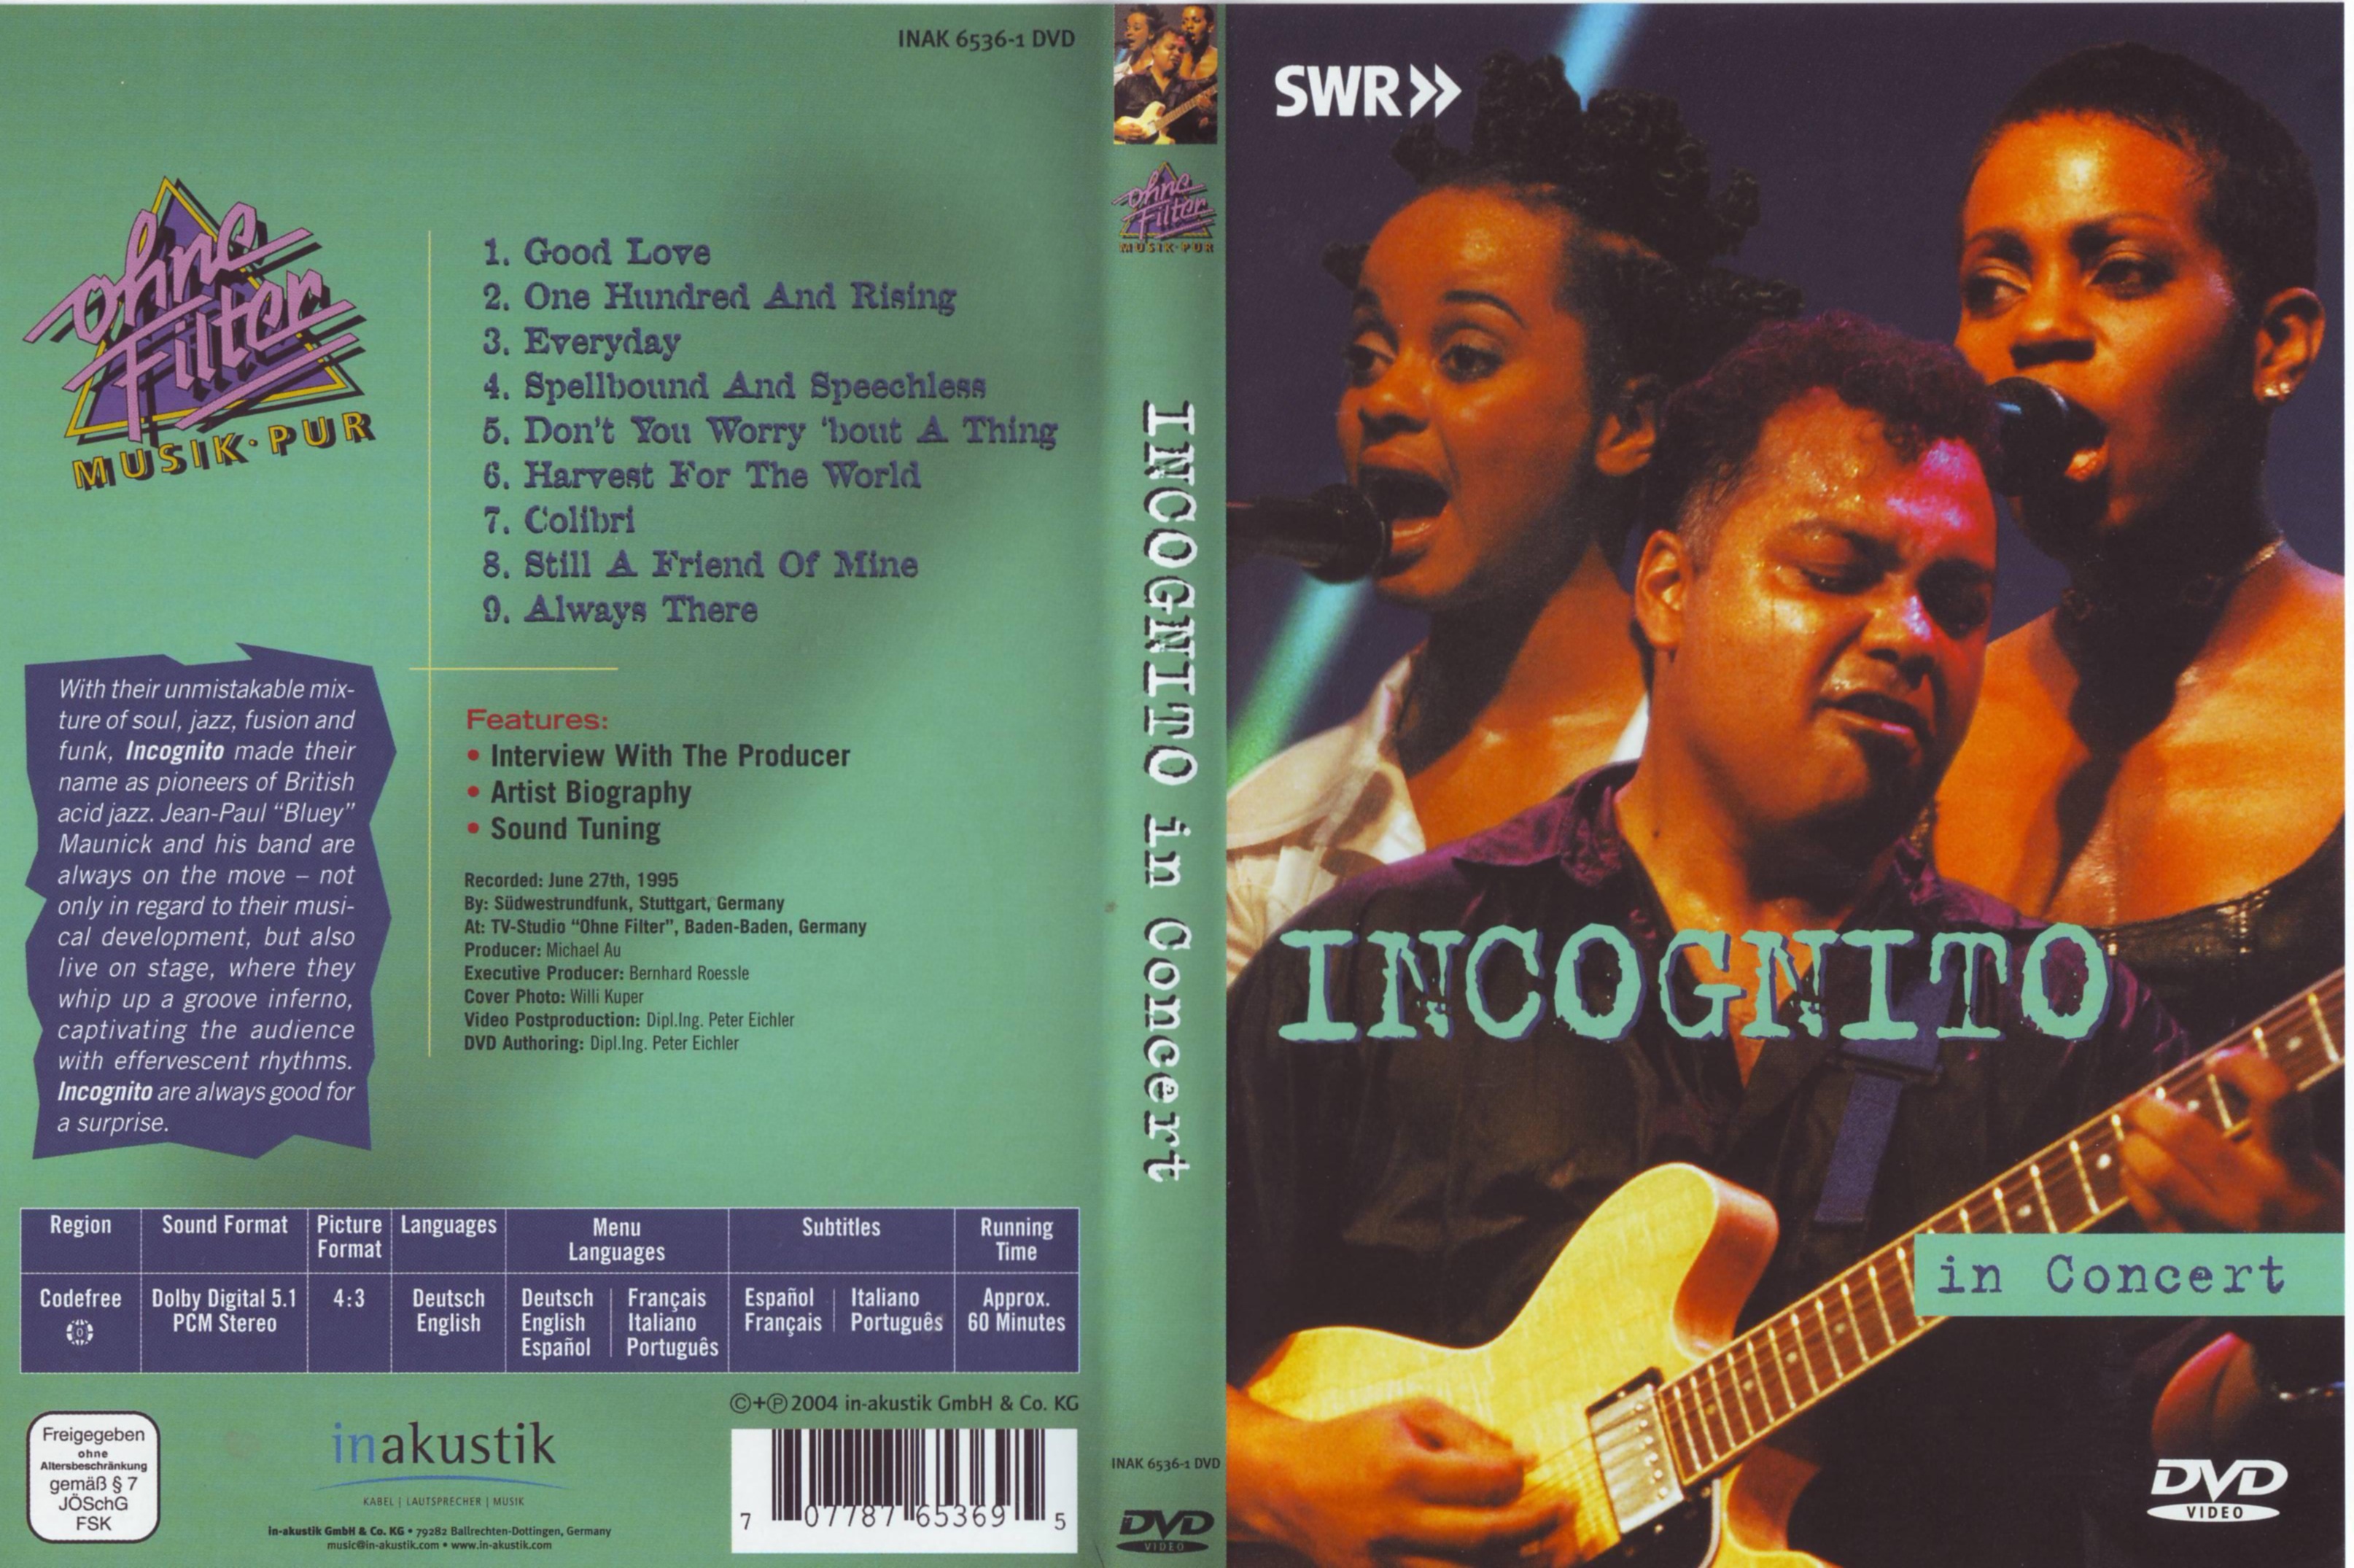 Jaquette DVD Incognito in concert